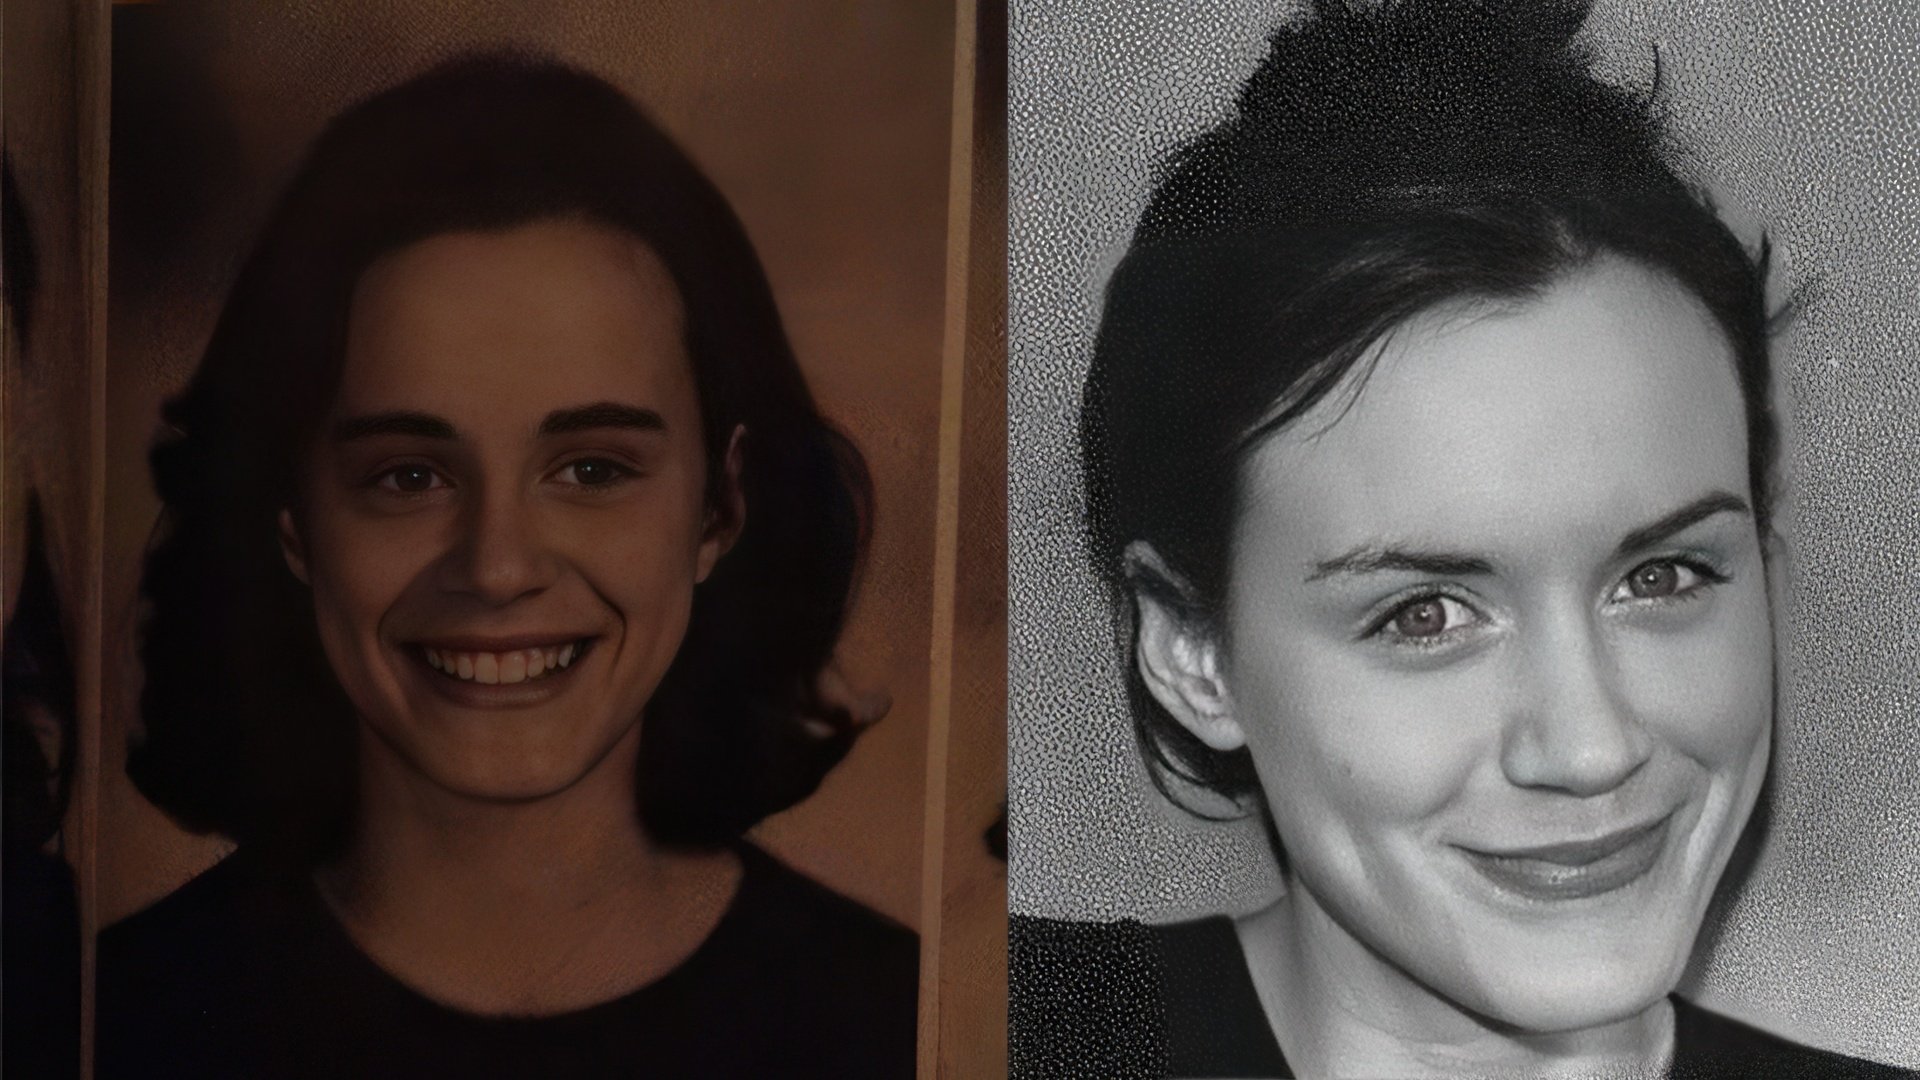 Taylor Schilling in her youth